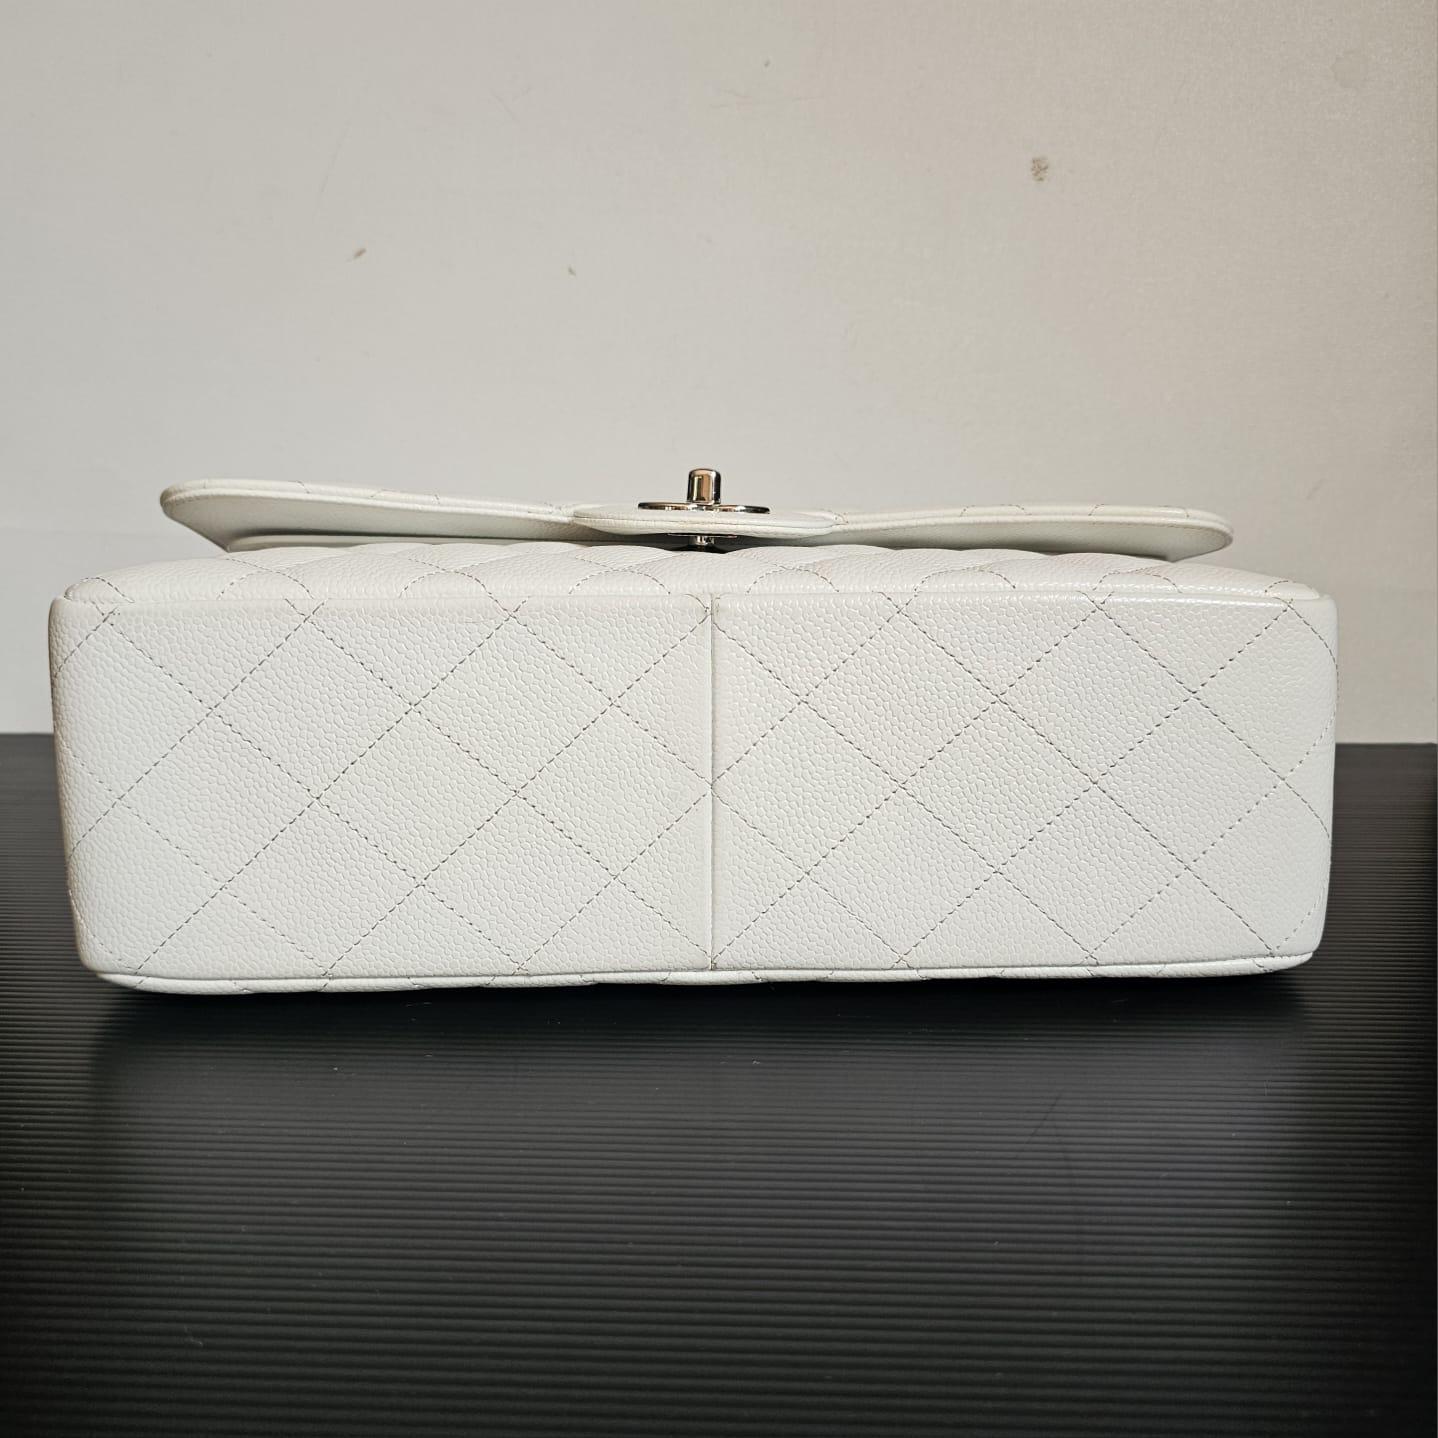 Chanel White Caviar Jumbo Double Flap Bag In Excellent Condition For Sale In Jakarta, Daerah Khusus Ibukota Jakarta